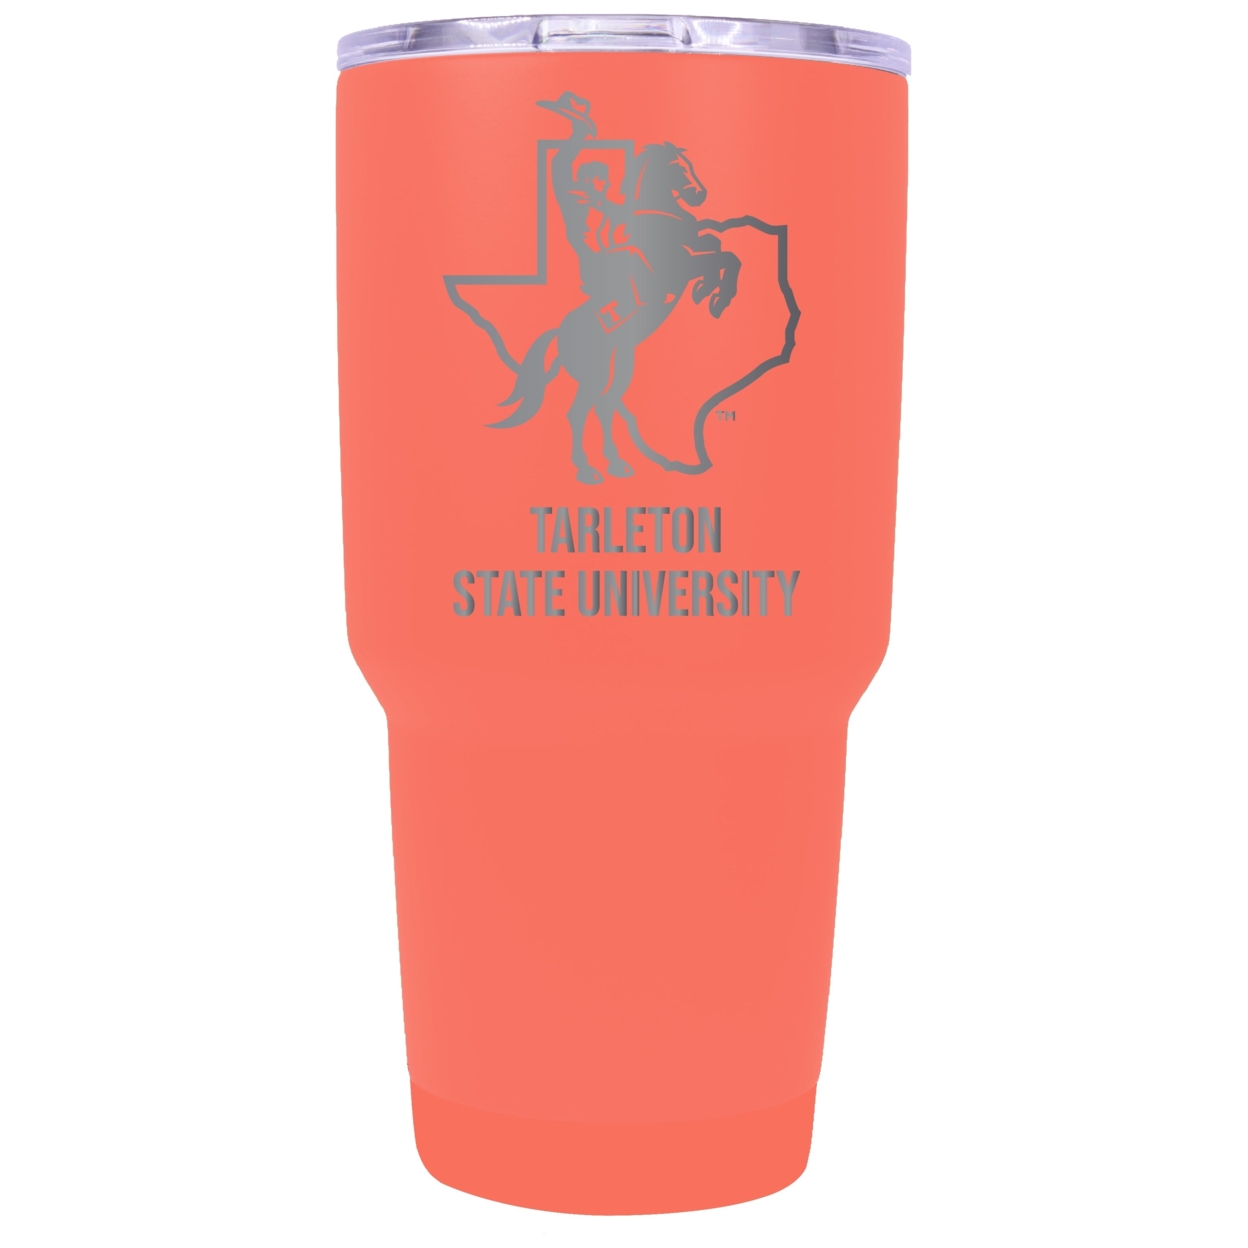 Tarleton State University 24 Oz Laser Engraved Stainless Steel Insulated Tumbler - Choose Your Color. - Coral